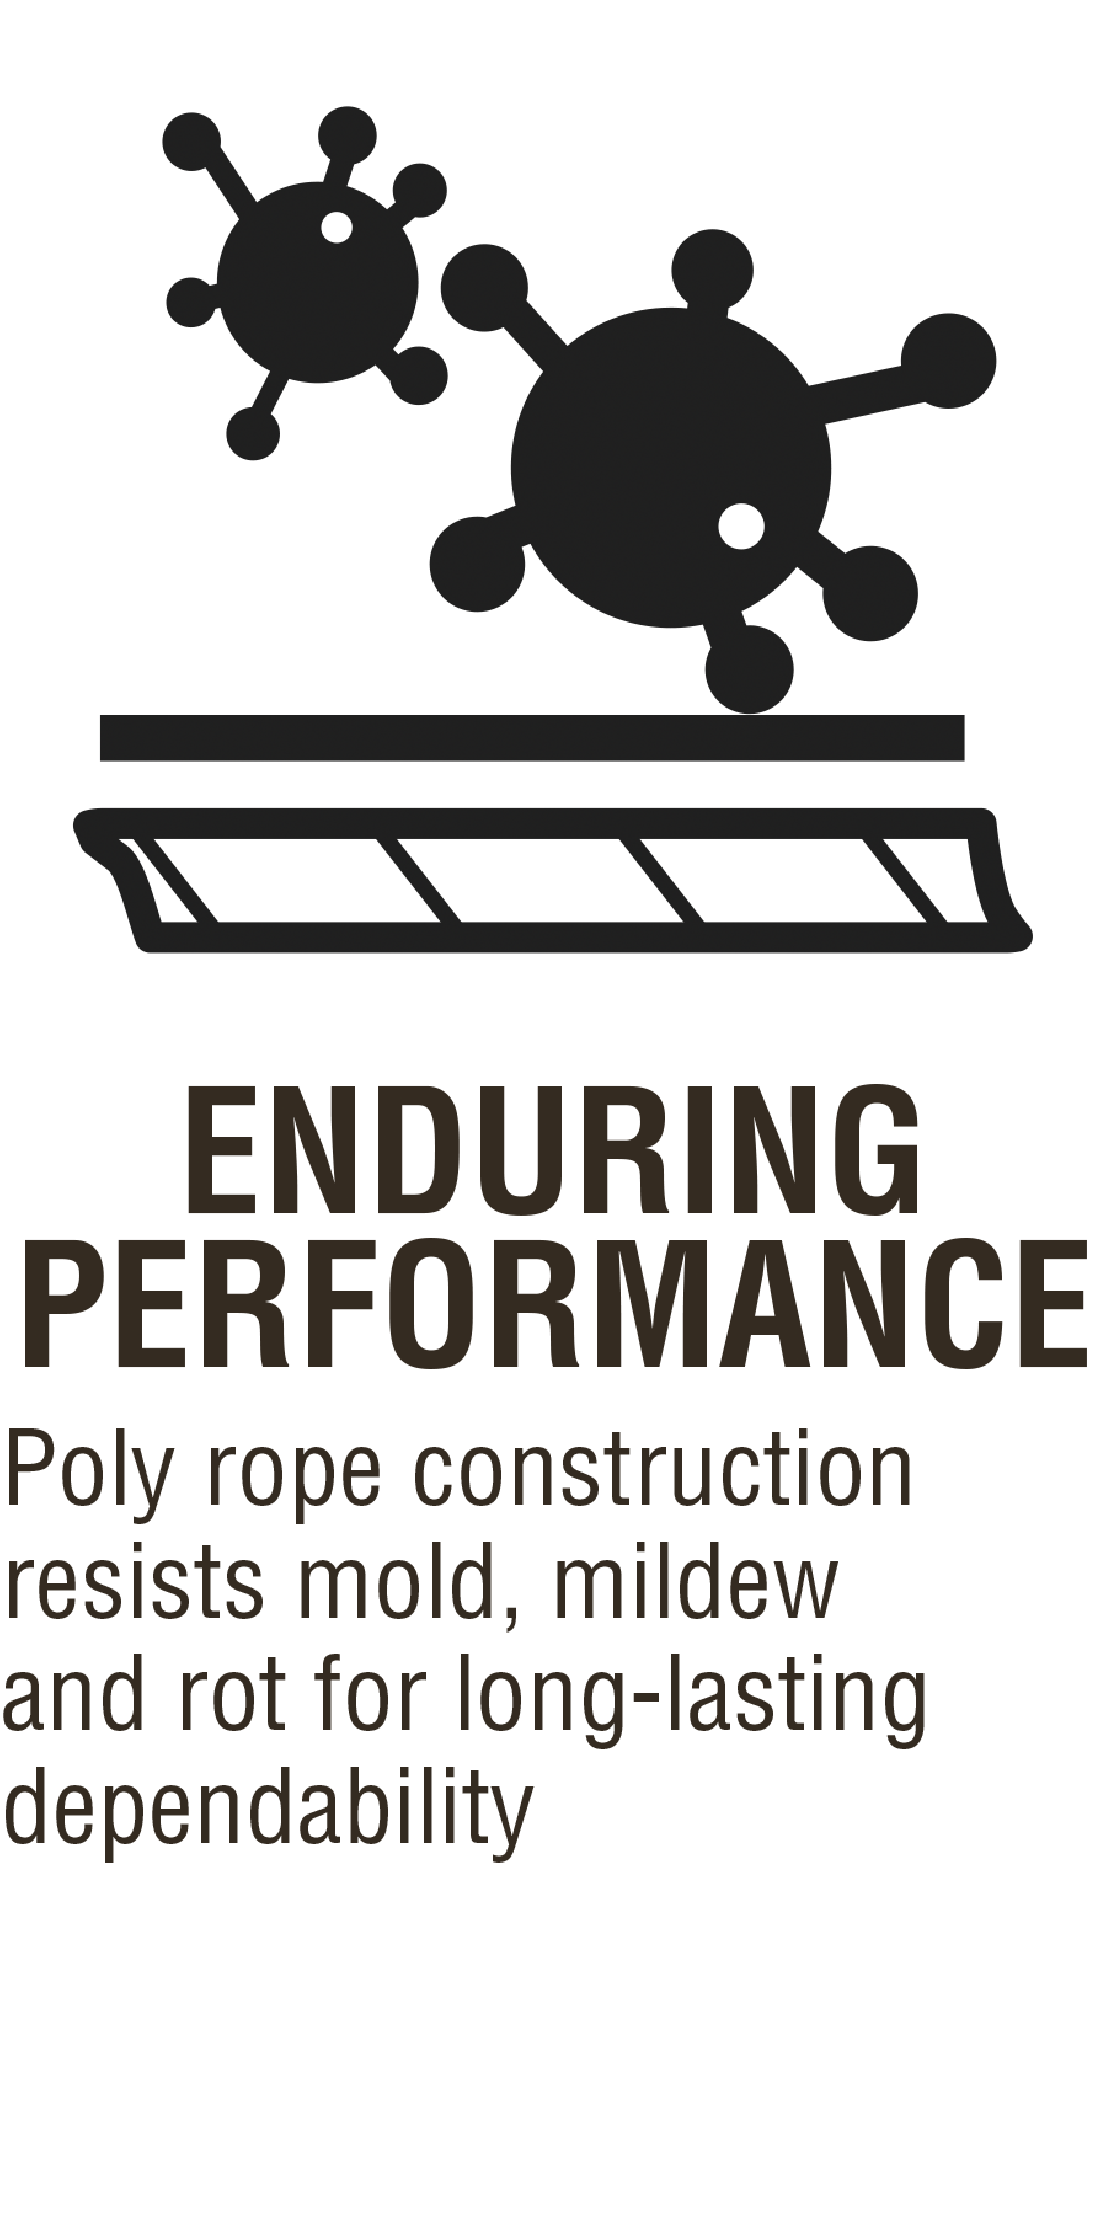 Poly rope construction resists mold, mildew and rot for long-lasting dependability